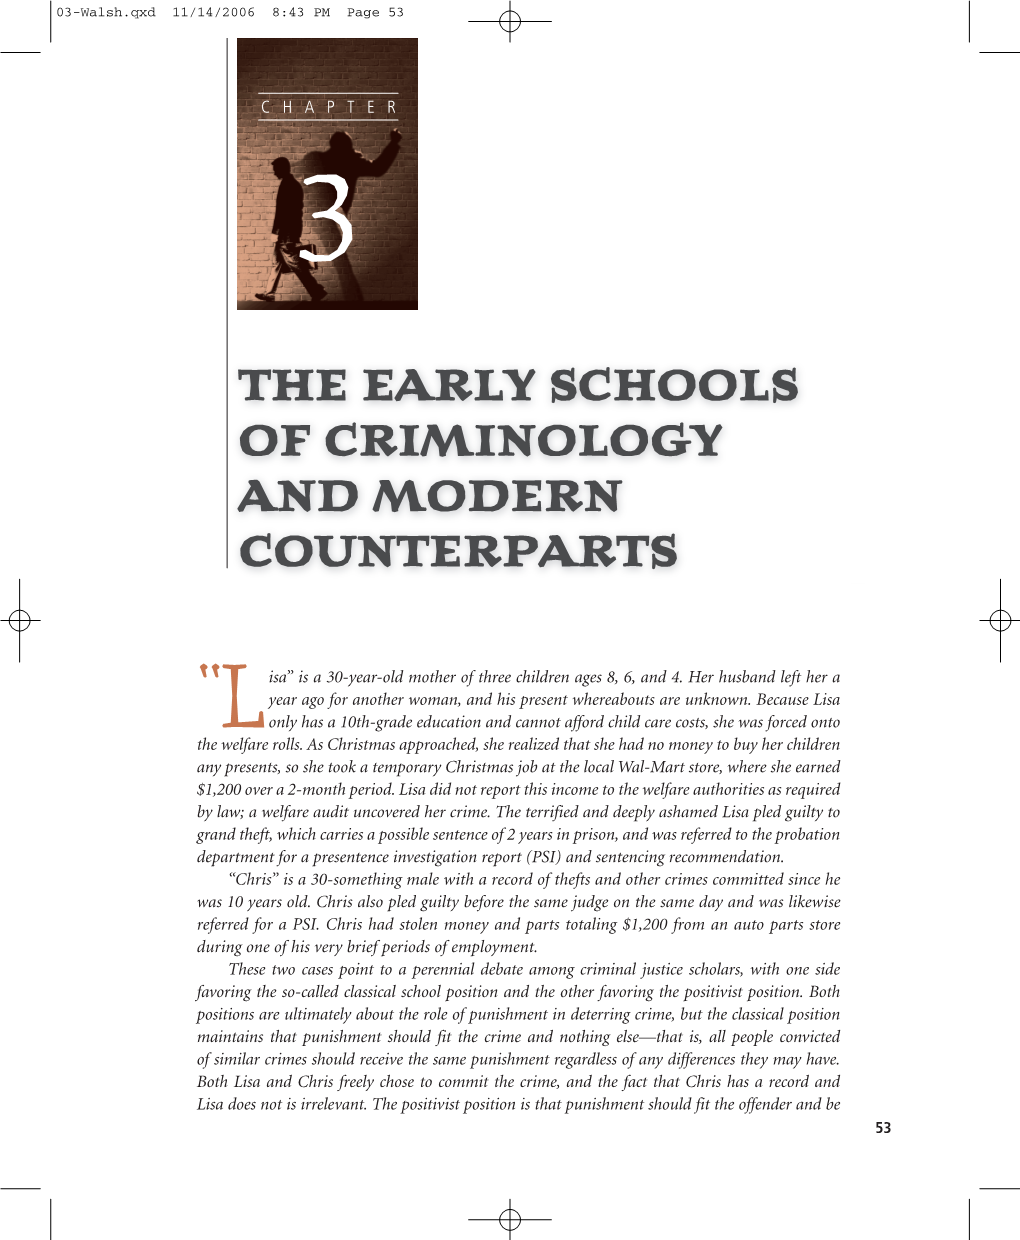 The Early Schools of Criminology and Modern Counterparts